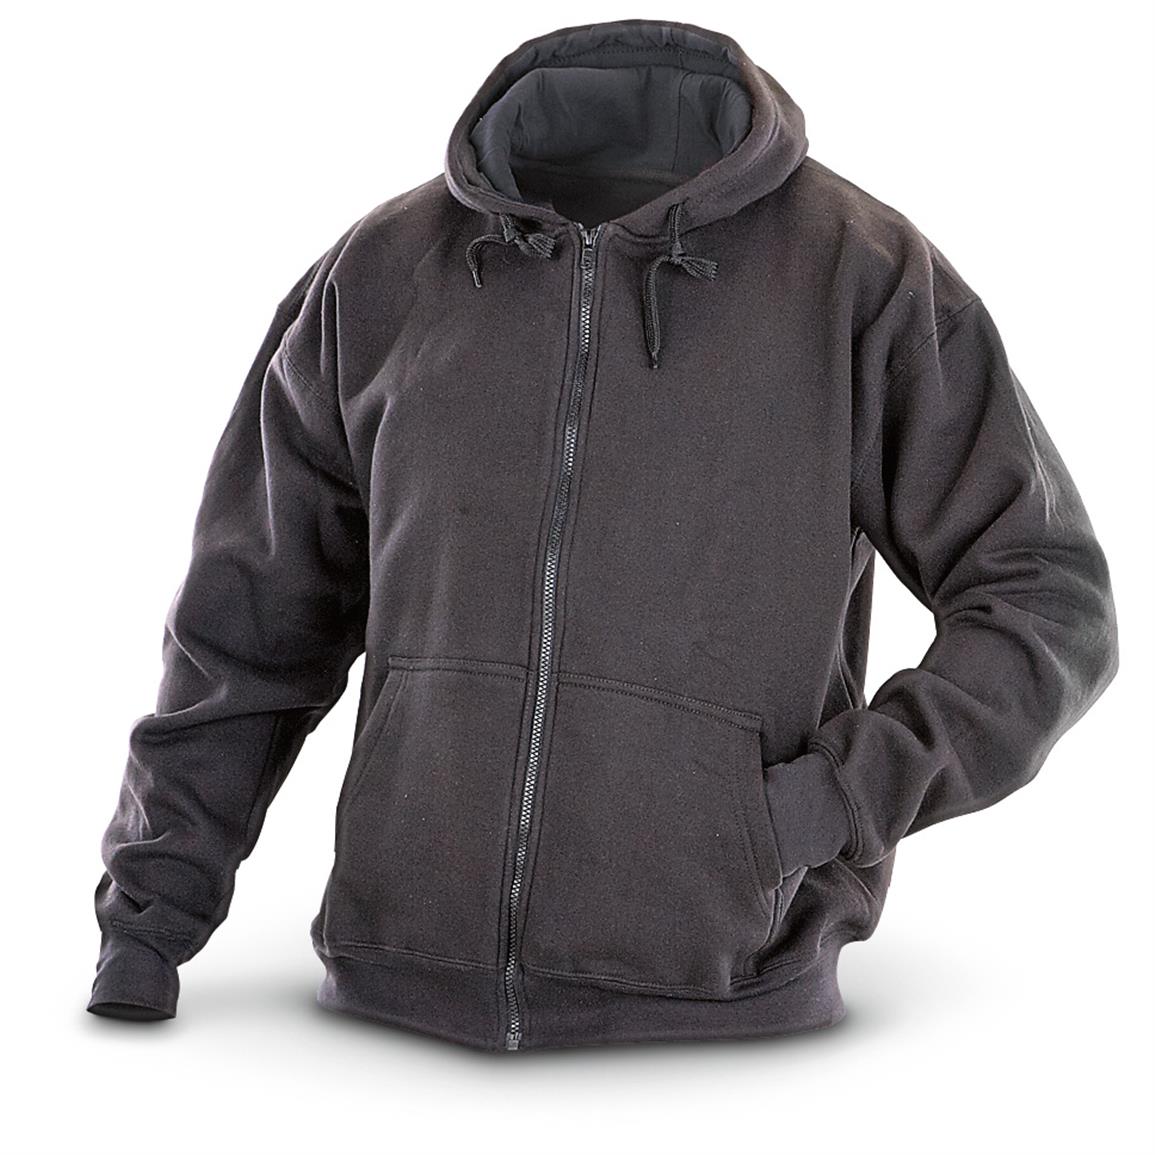 5ive Star Gear Concealment Hoodie, Black - 614842, Tactical Clothing at ...